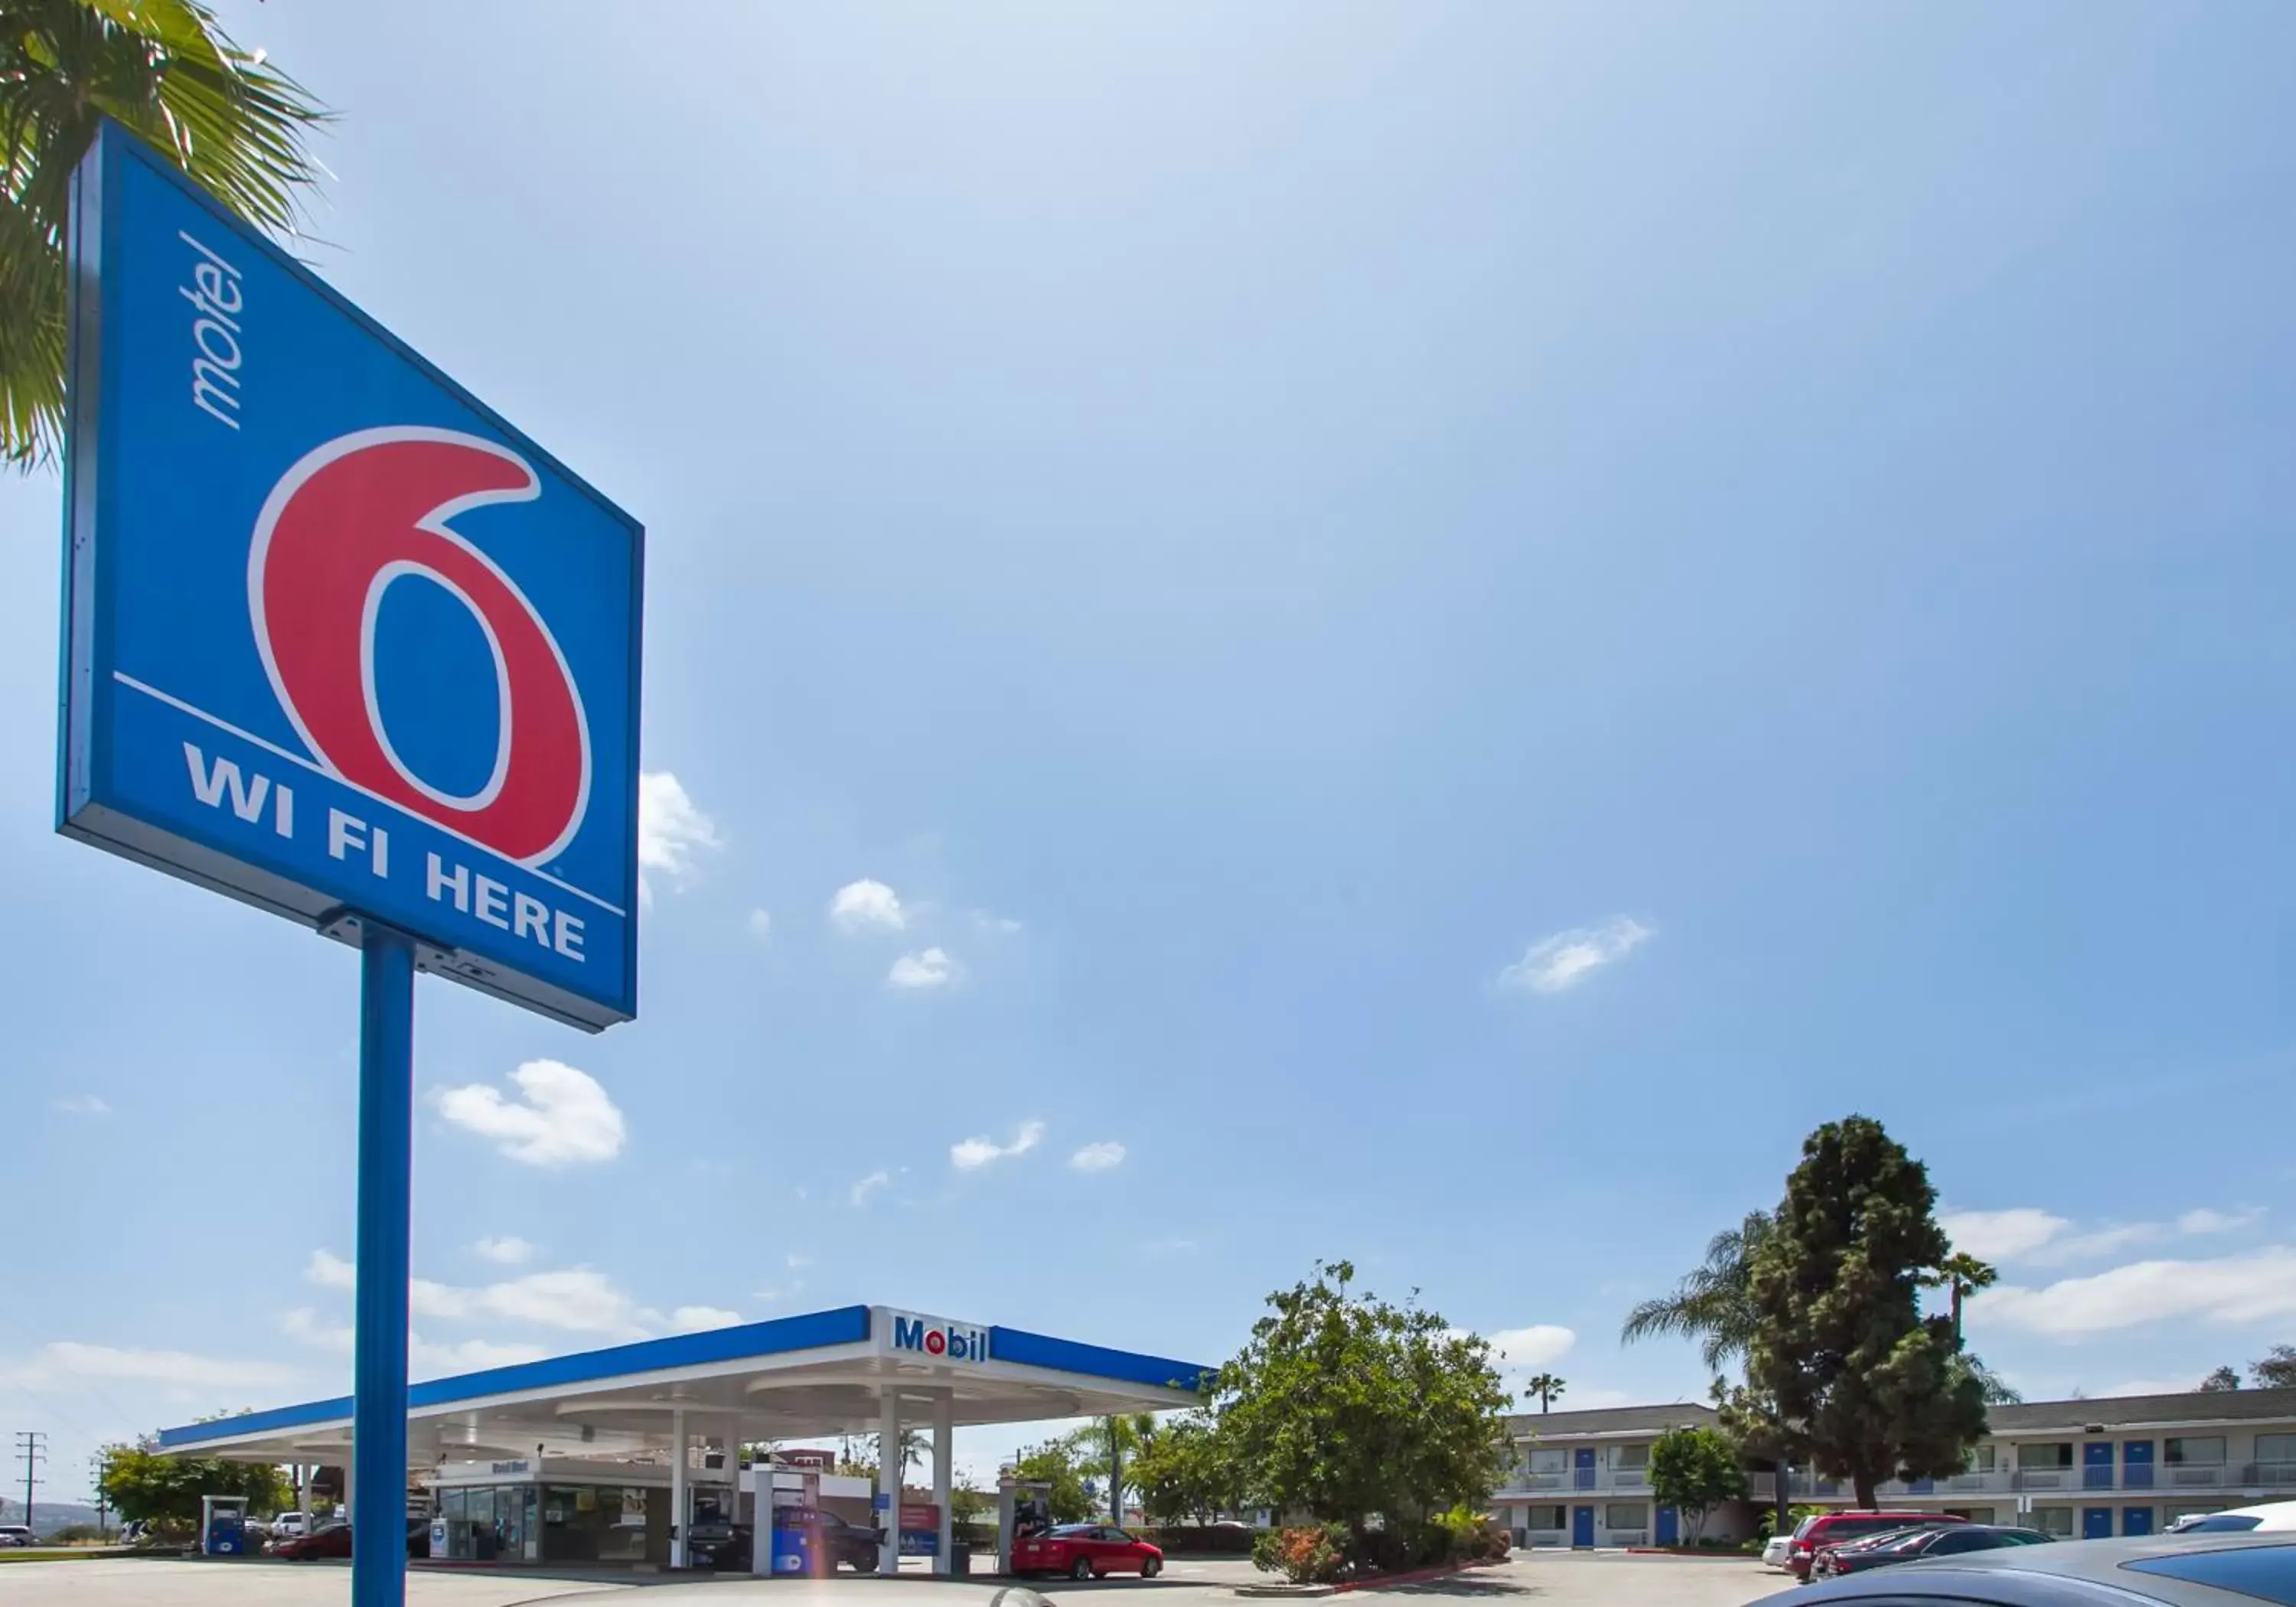 Property logo or sign in Motel 6-Rosemead, CA - Los Angeles